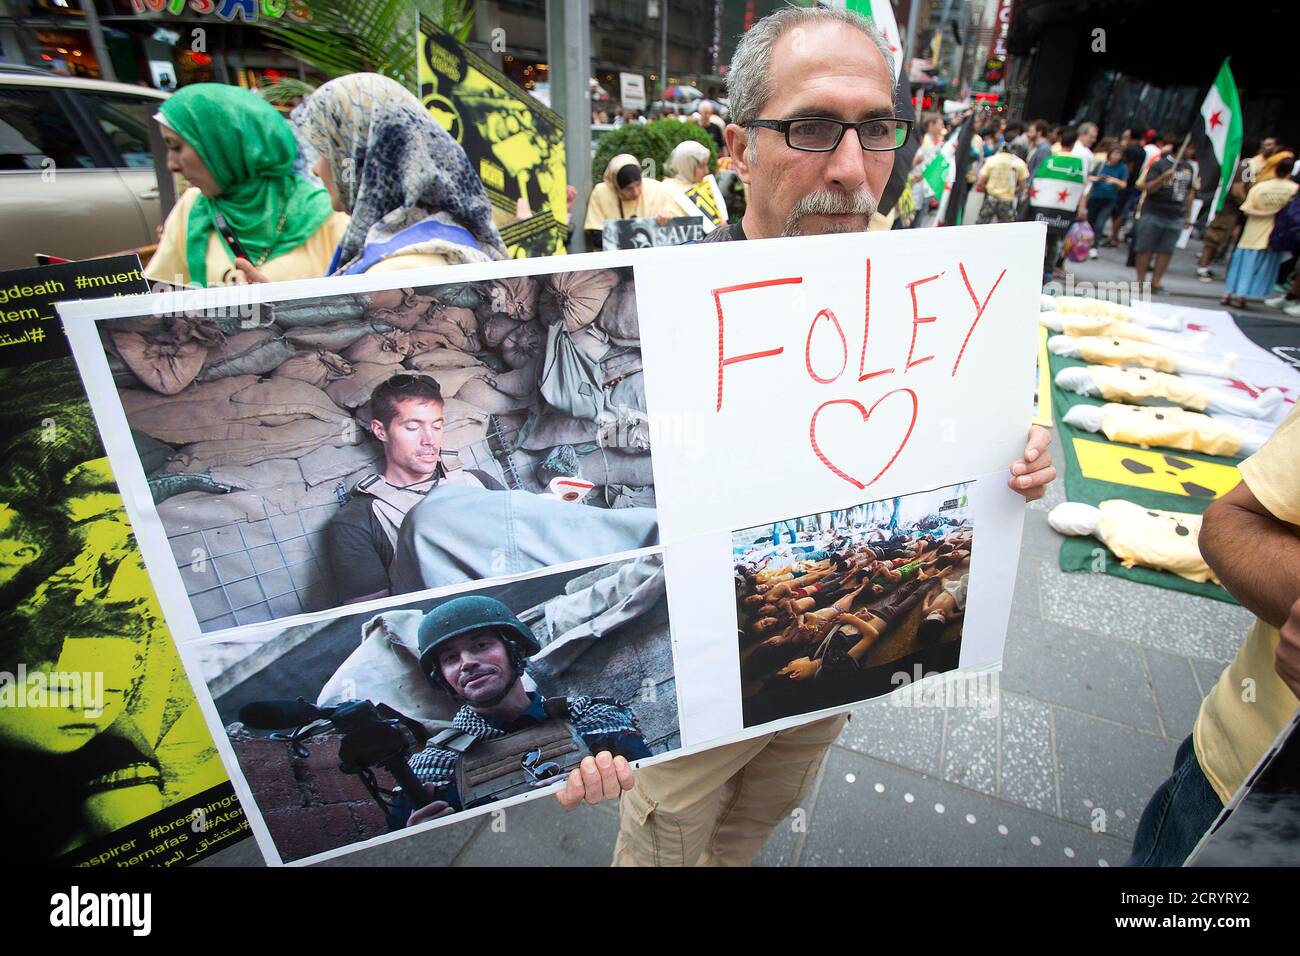 A man holds up a sign in memory of U.S. journalist James Foley during a protest against the Assad regime in Syria in Times Square in New York August 22, 2014. Foley, who was abducted in Syria in late 2012, was beheaded by a masked member of the Islamic State group in an act filmed in a video released on August 19 that also threatened a second American journalist, Steven Sotloff.   REUTERS/Carlo Allegri (UNITED STATES - Tags: SOCIETY CIVIL UNREST) Stock Photo